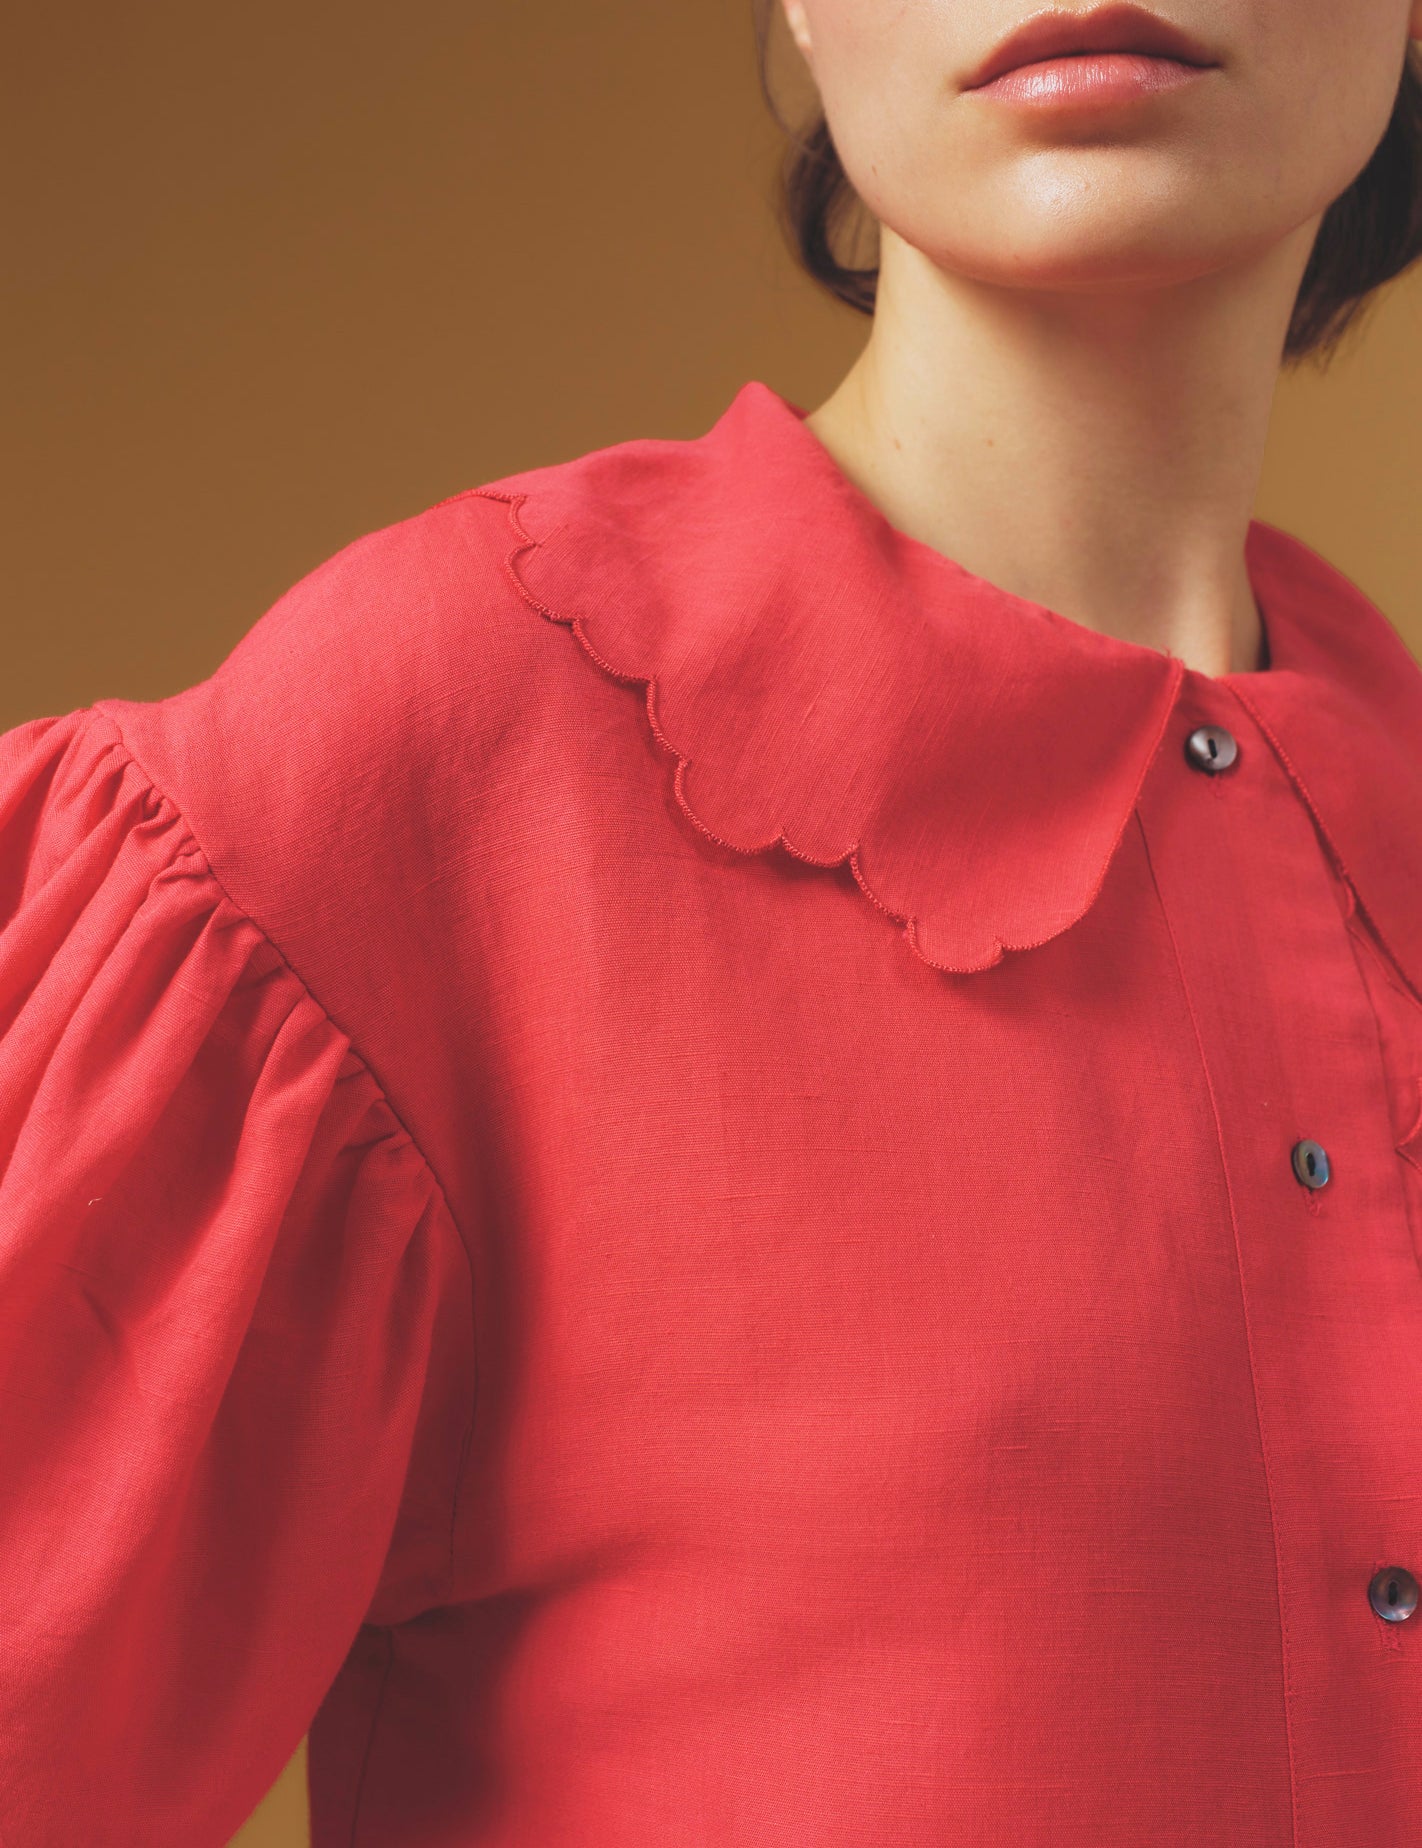 Collar detail of Vanina Barocco Scallops Rapsberry Blouse by Thierry Colson